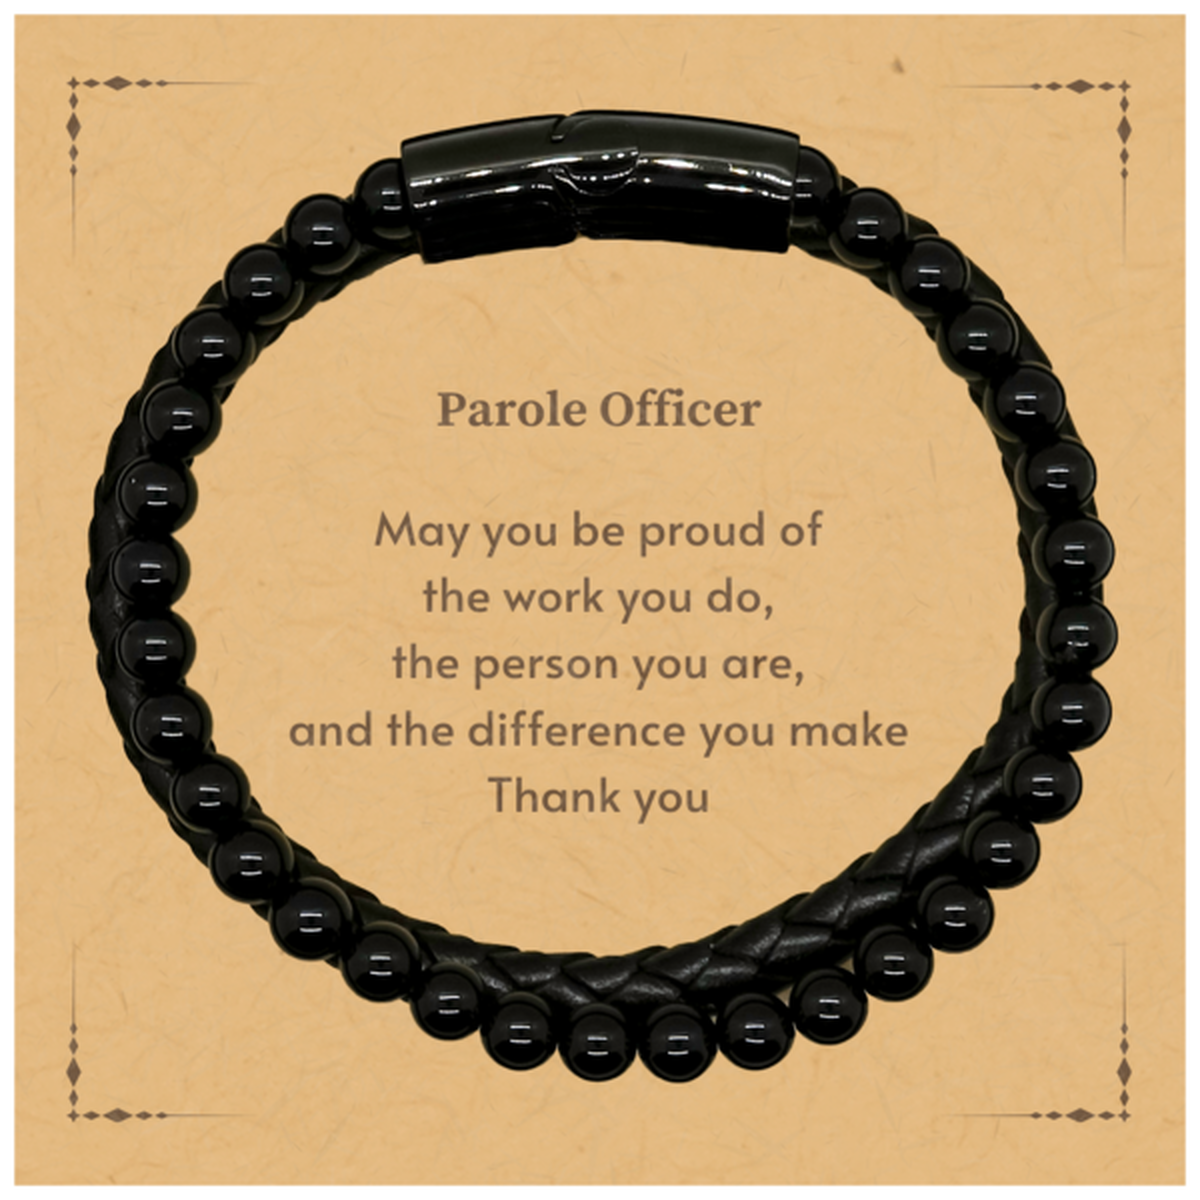 Heartwarming Stone Leather Bracelets Retirement Coworkers Gifts for Parole Officer, Parole Officer May You be proud of the work you do, the person you are Gifts for Boss Men Women Friends